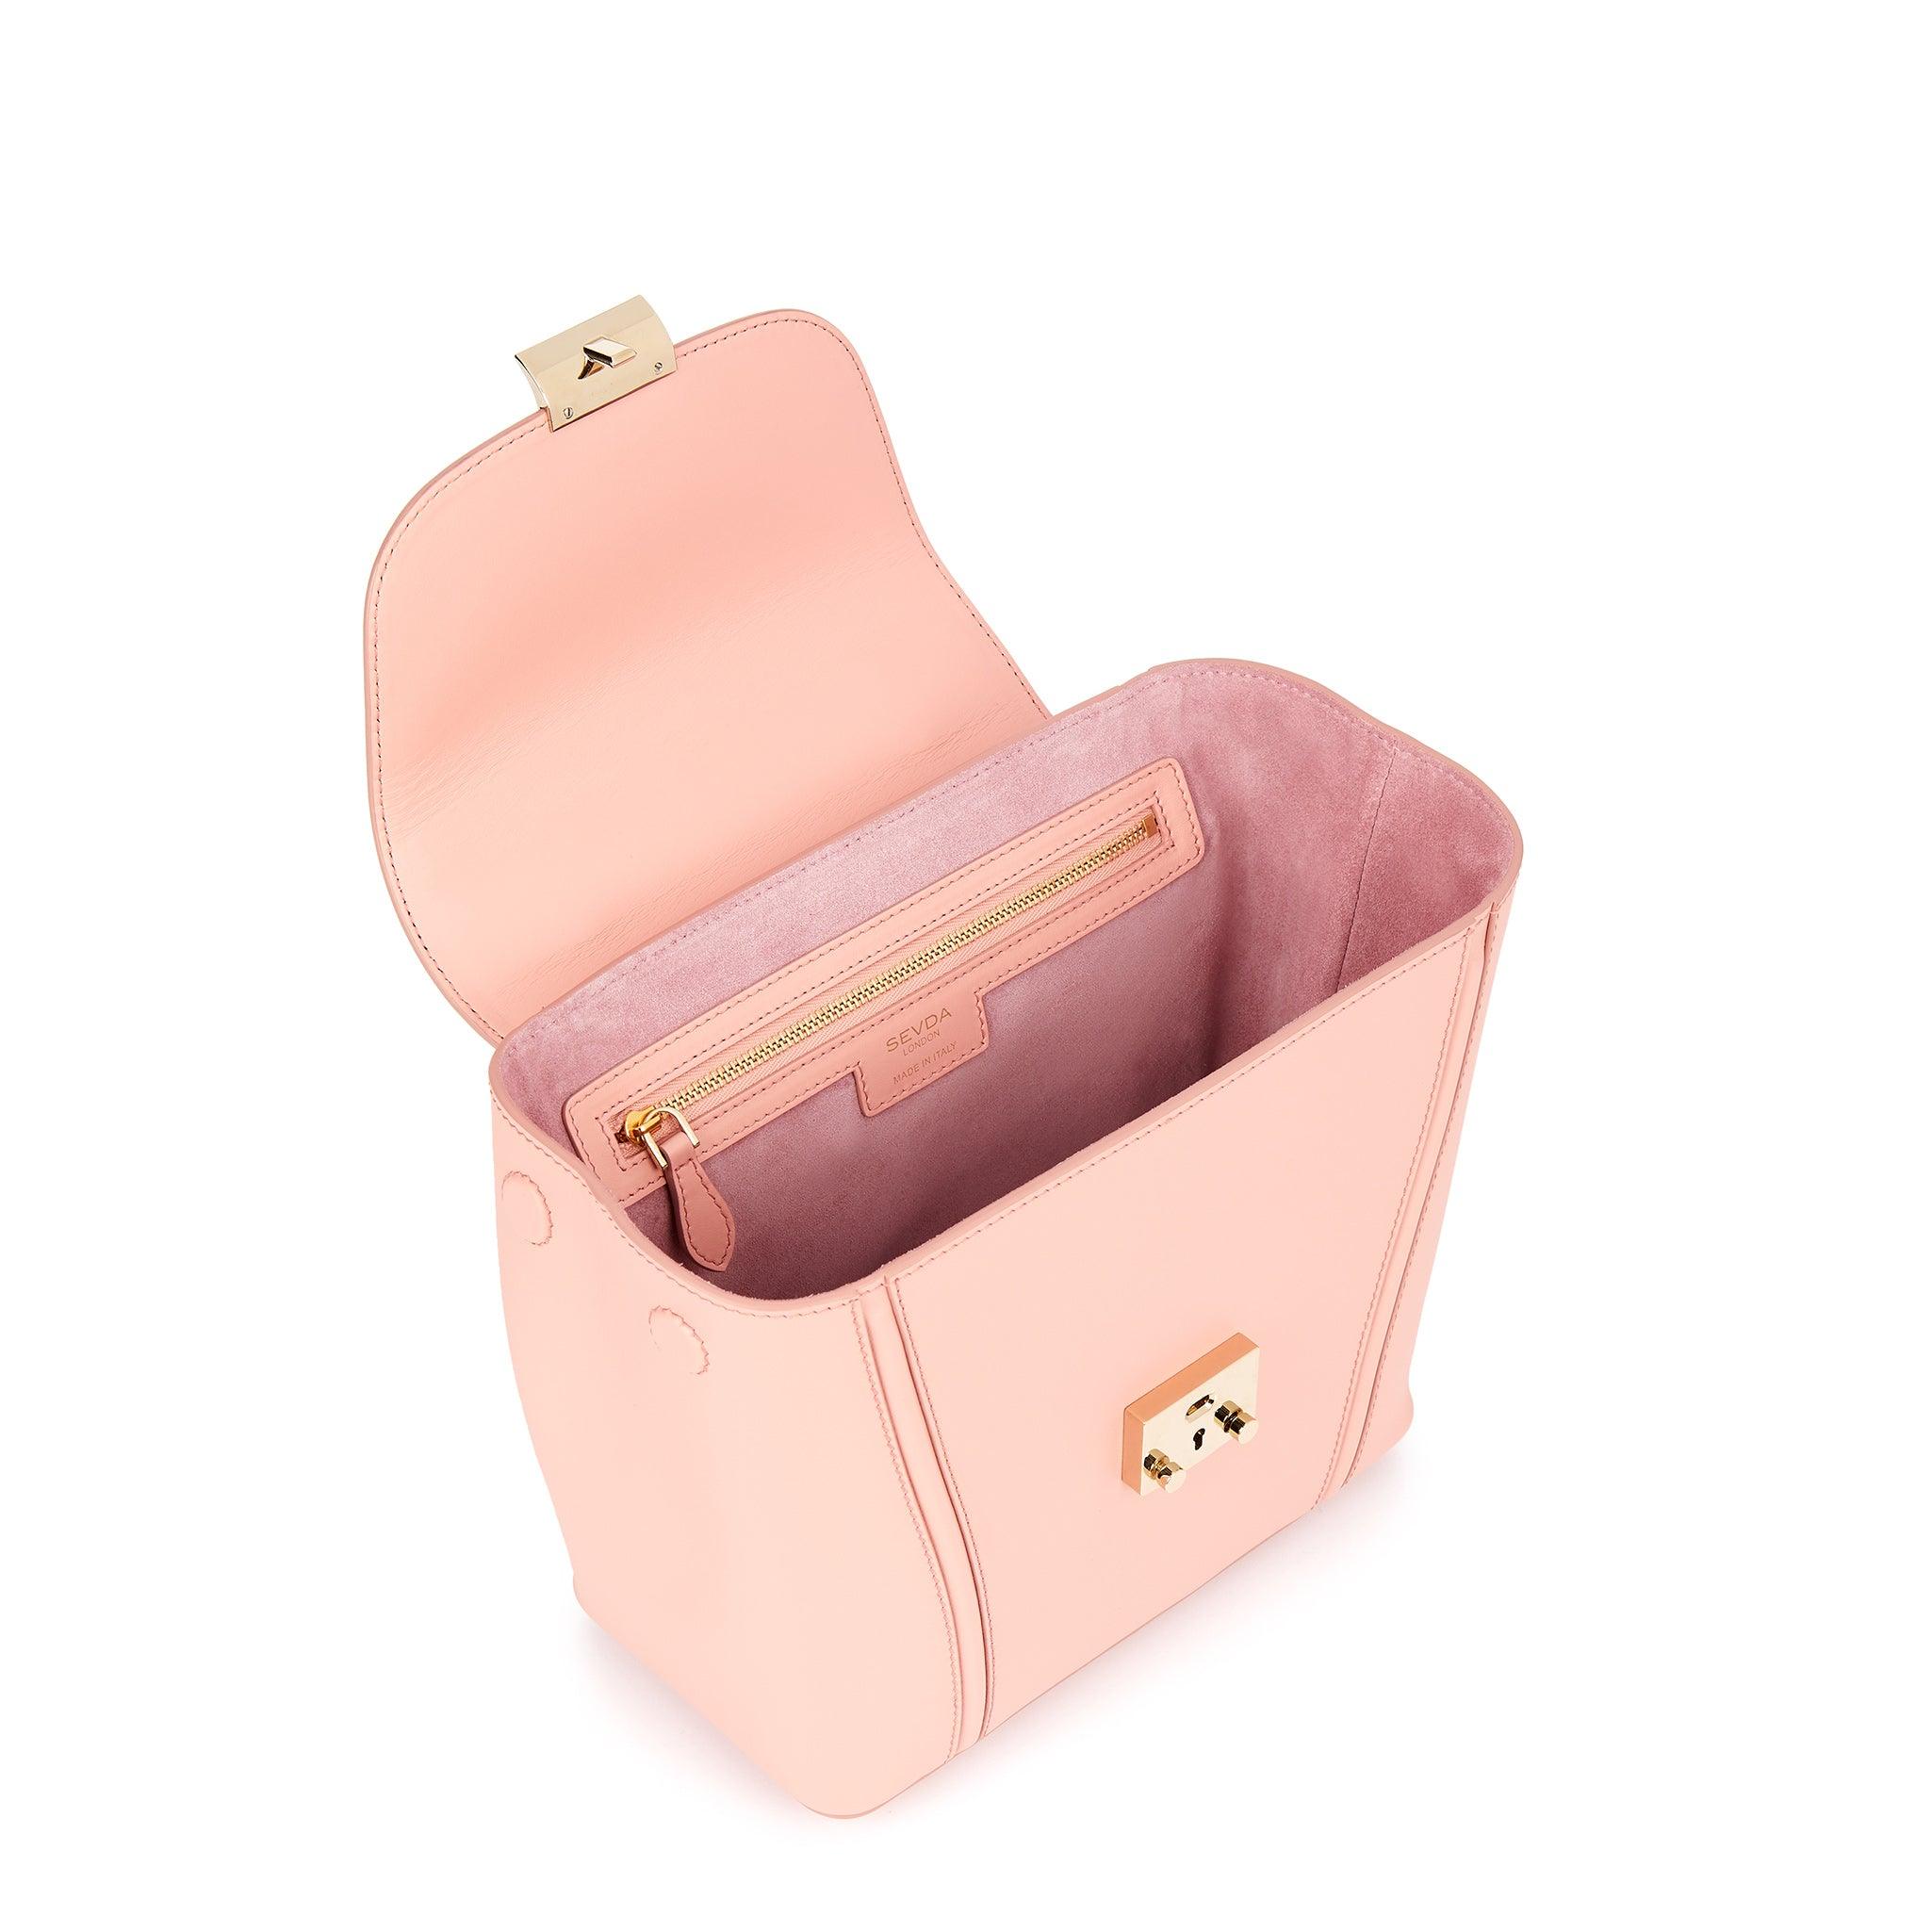 Dusty Pink Small Top Handle Designer Bag - Fusion of London style and Italian craftsmanship.